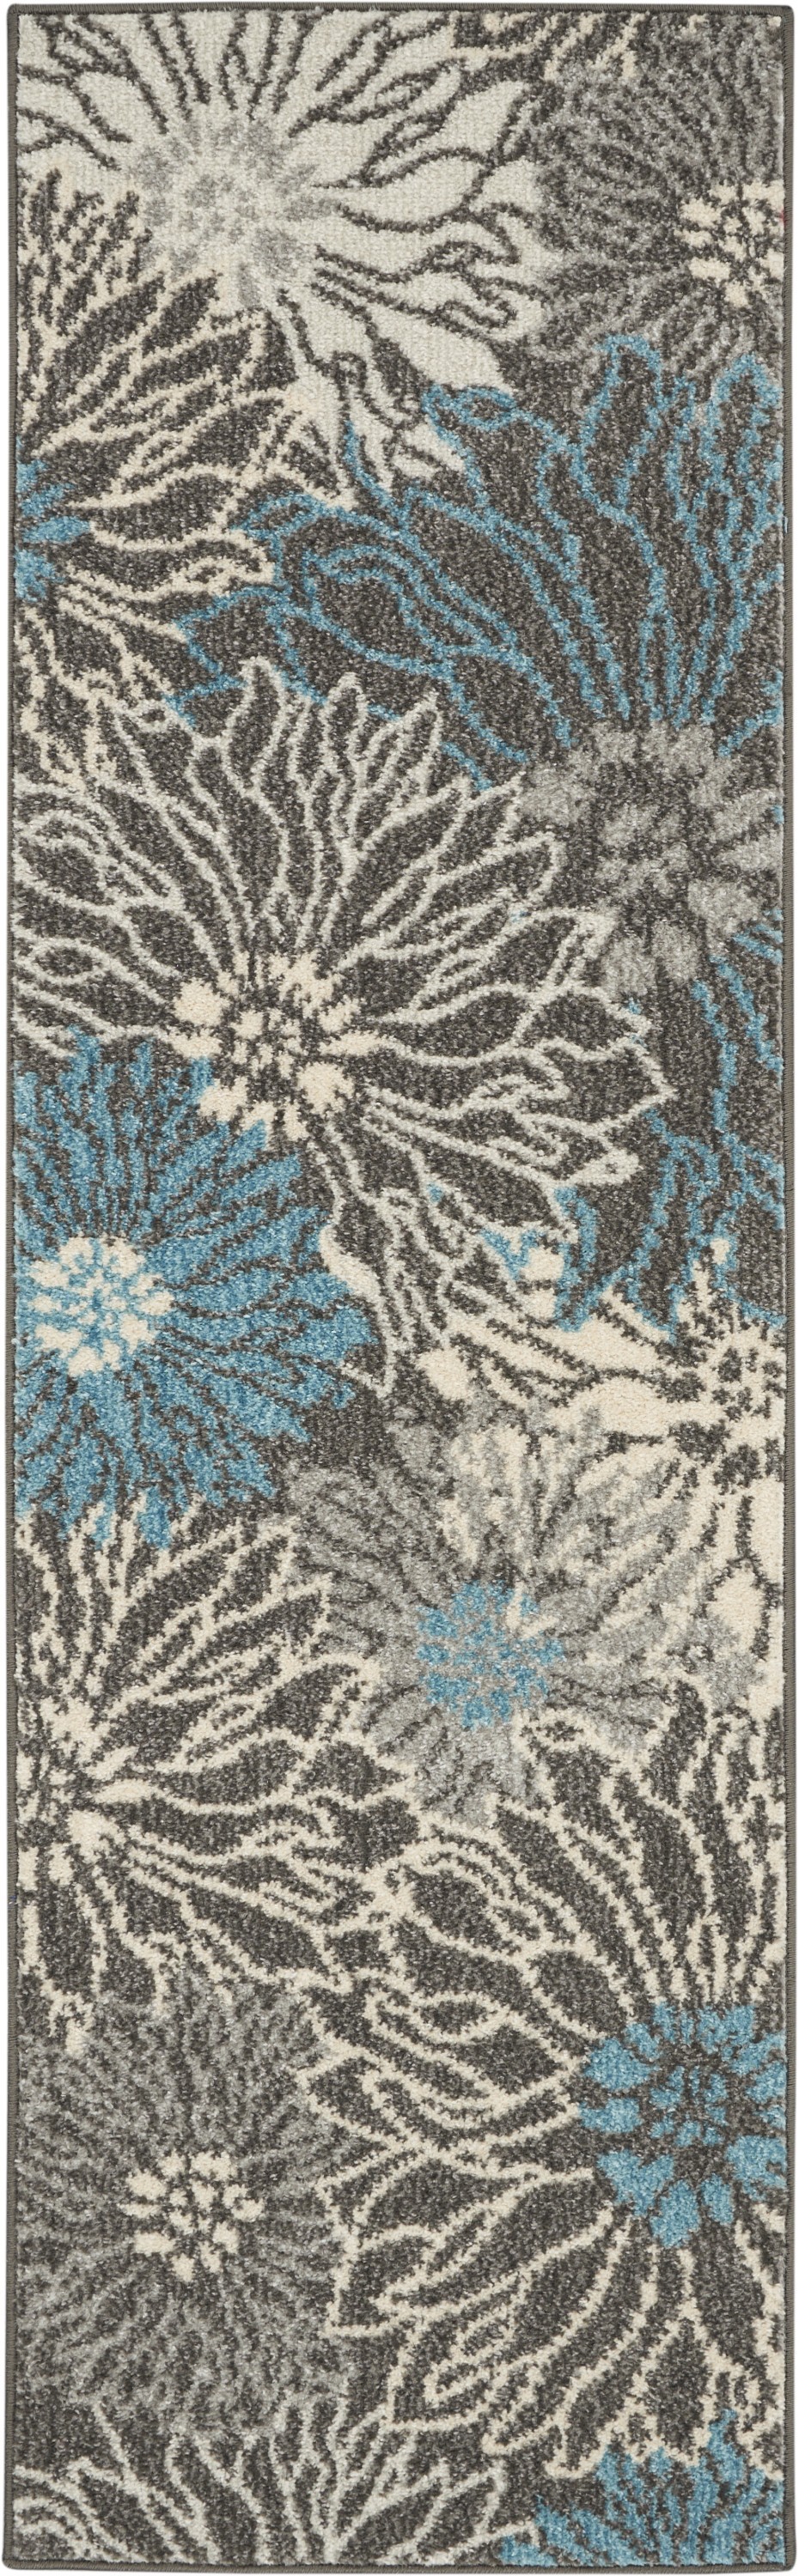 6' Blue And Gray Floral Power Loom Runner Rug-385409-1